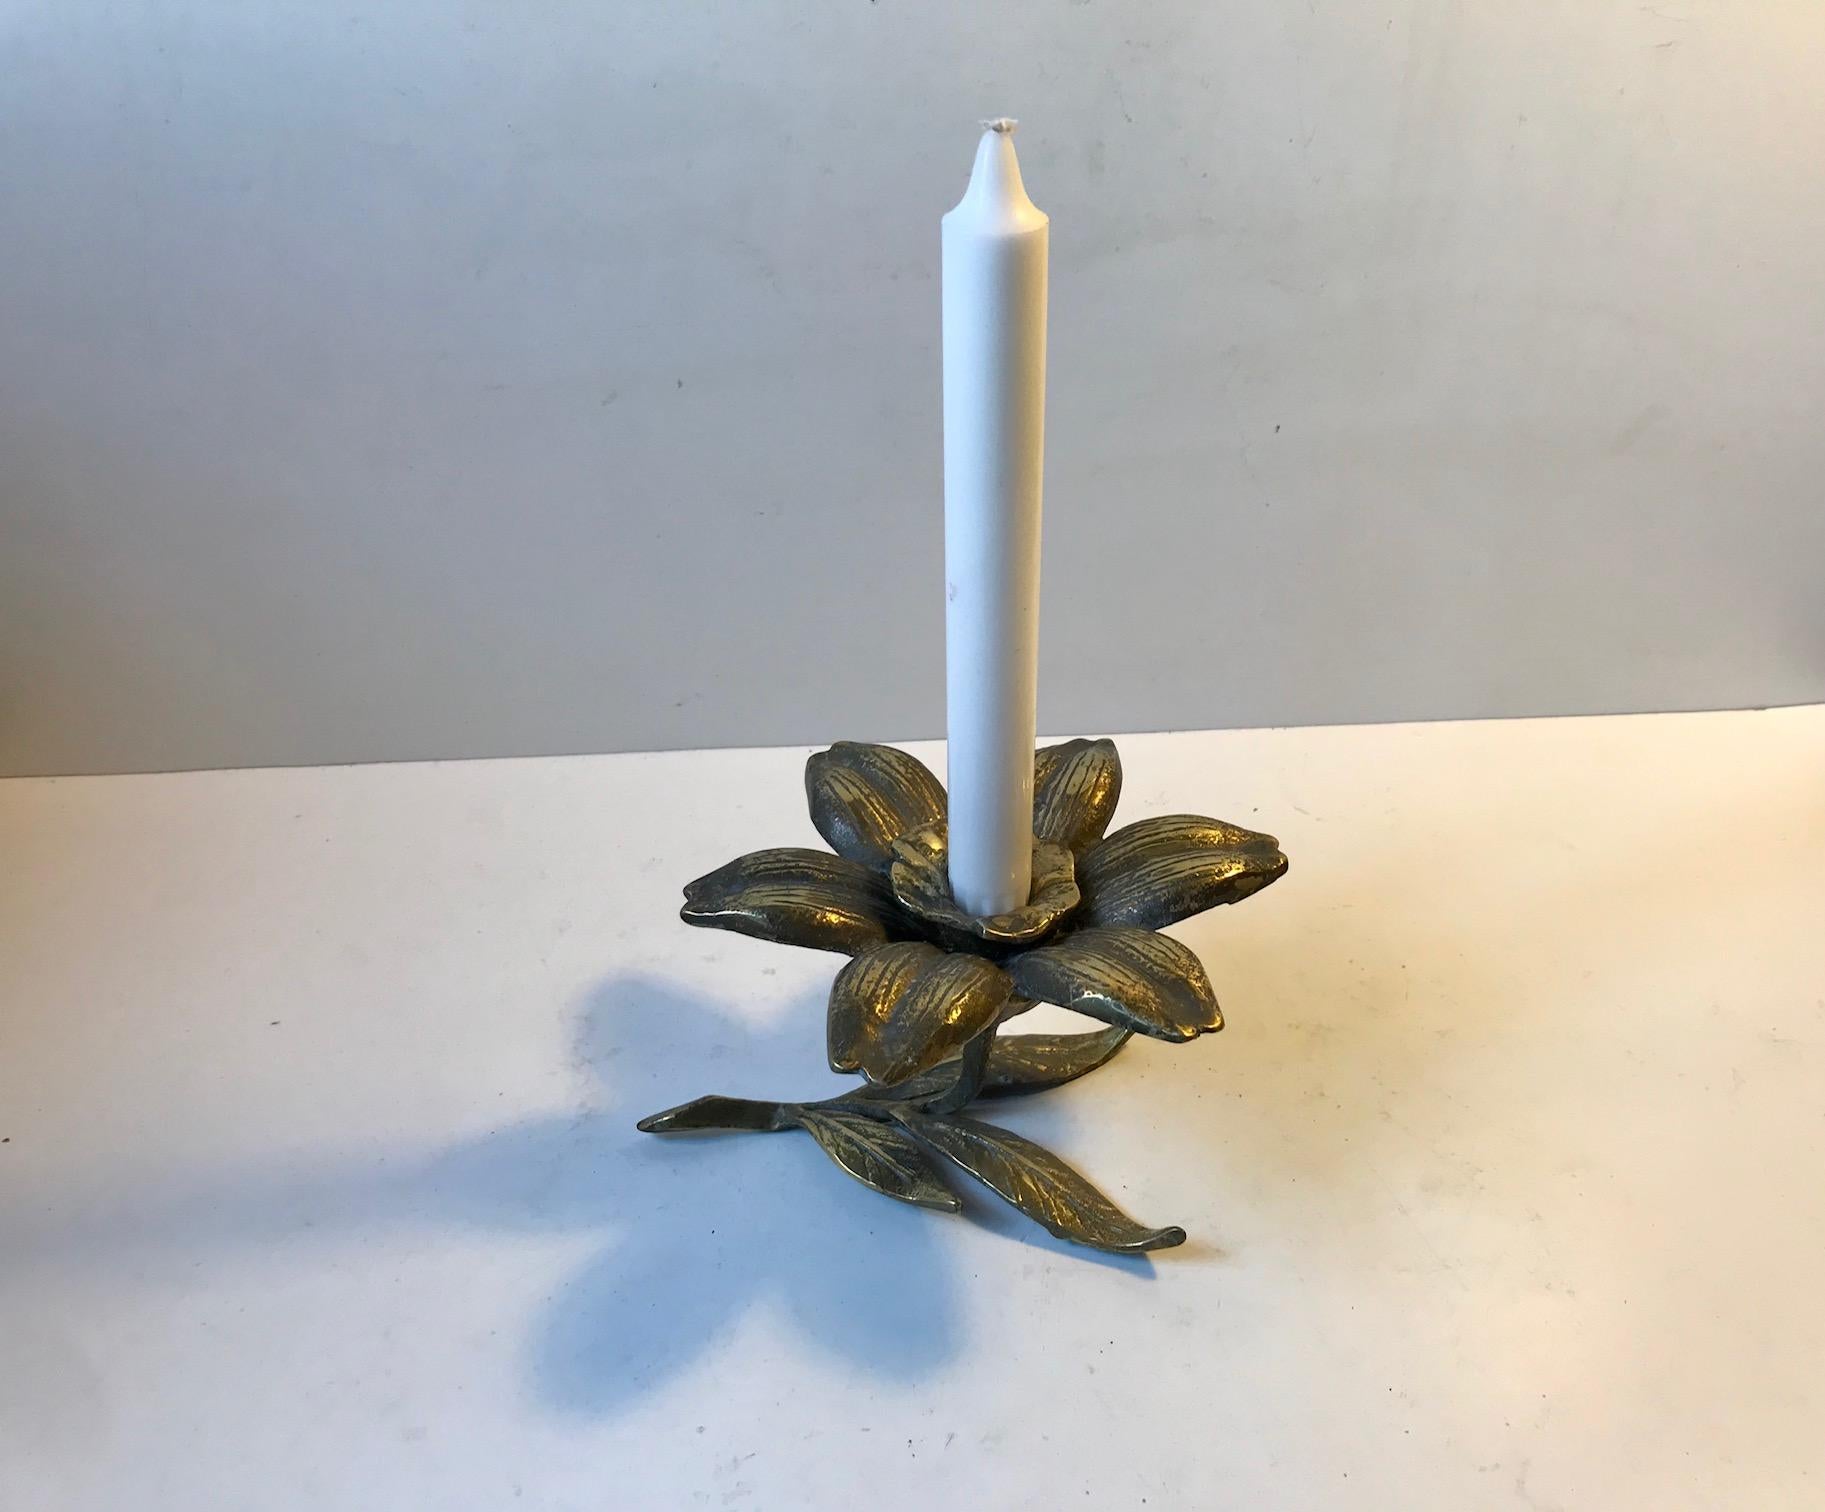 Naturalistically cast brass flower and leaf candlestick - Chamberstick for a regular sized candle. Manufactured in Germany or France during the 1930s. It shows a patina that is consistent with its age.